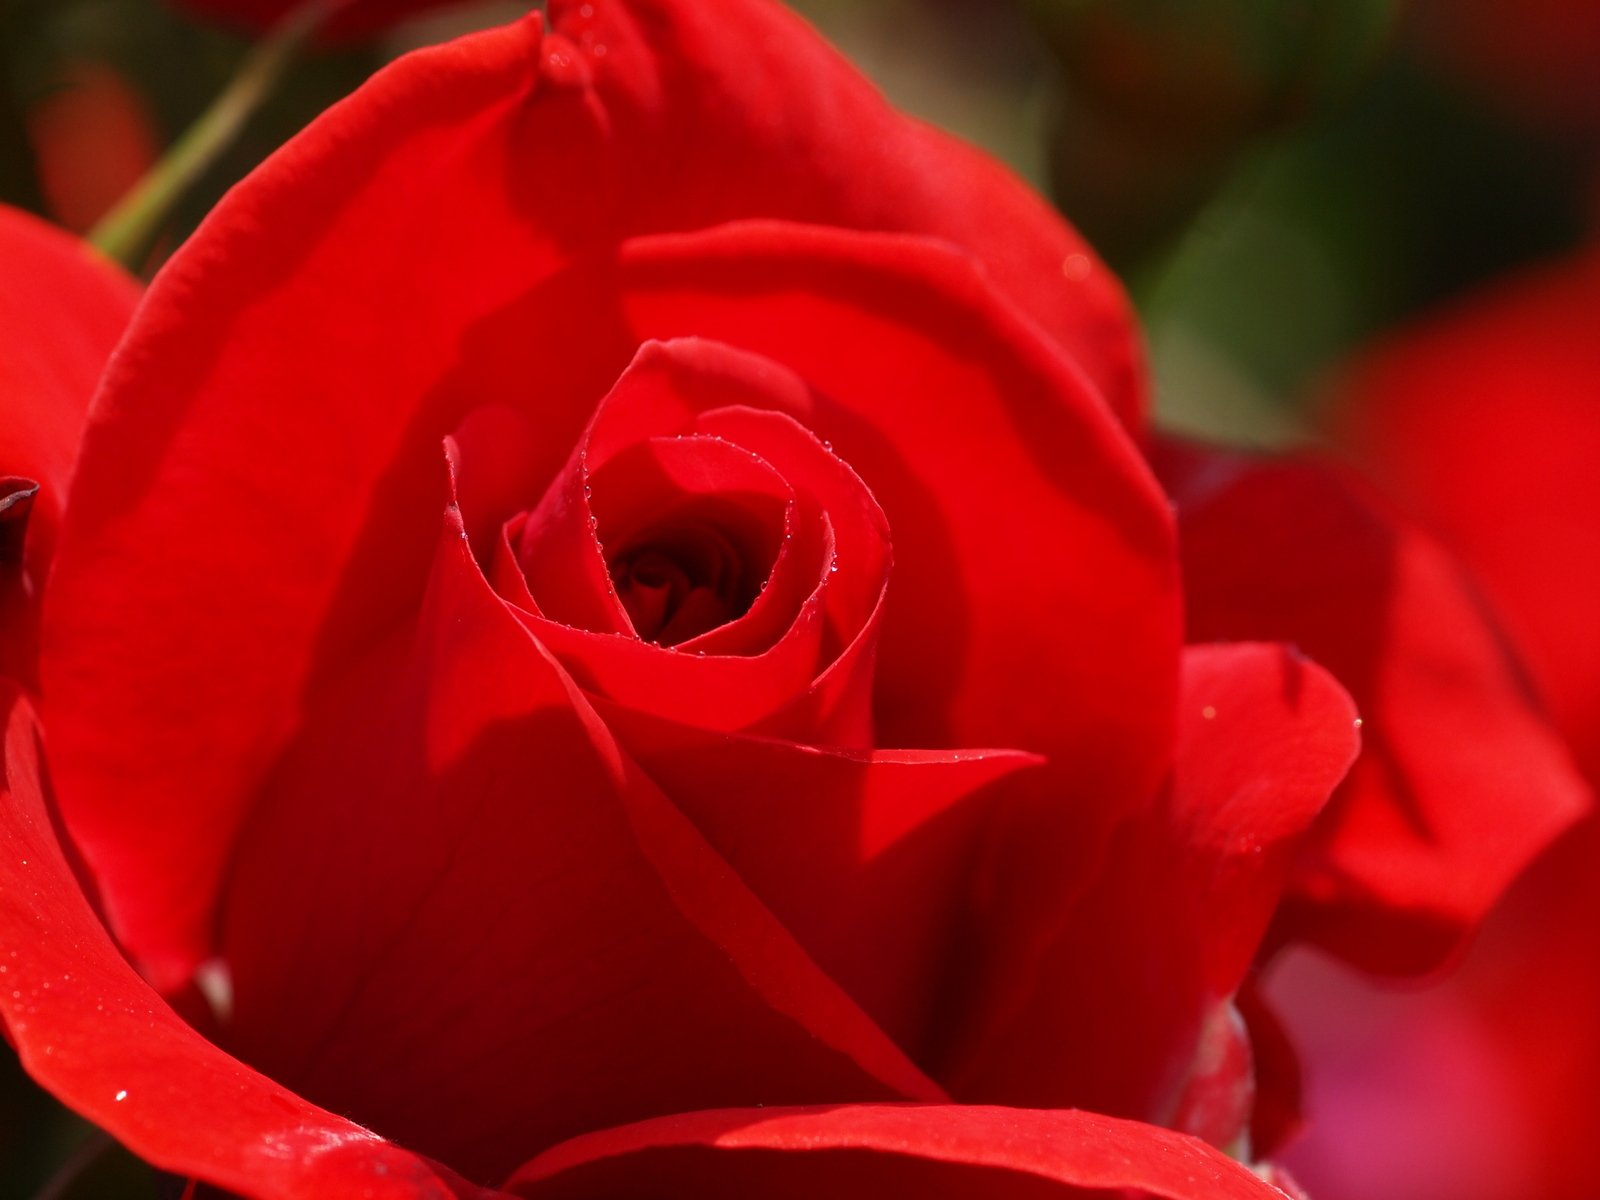 a close up of a red rose with water droplets